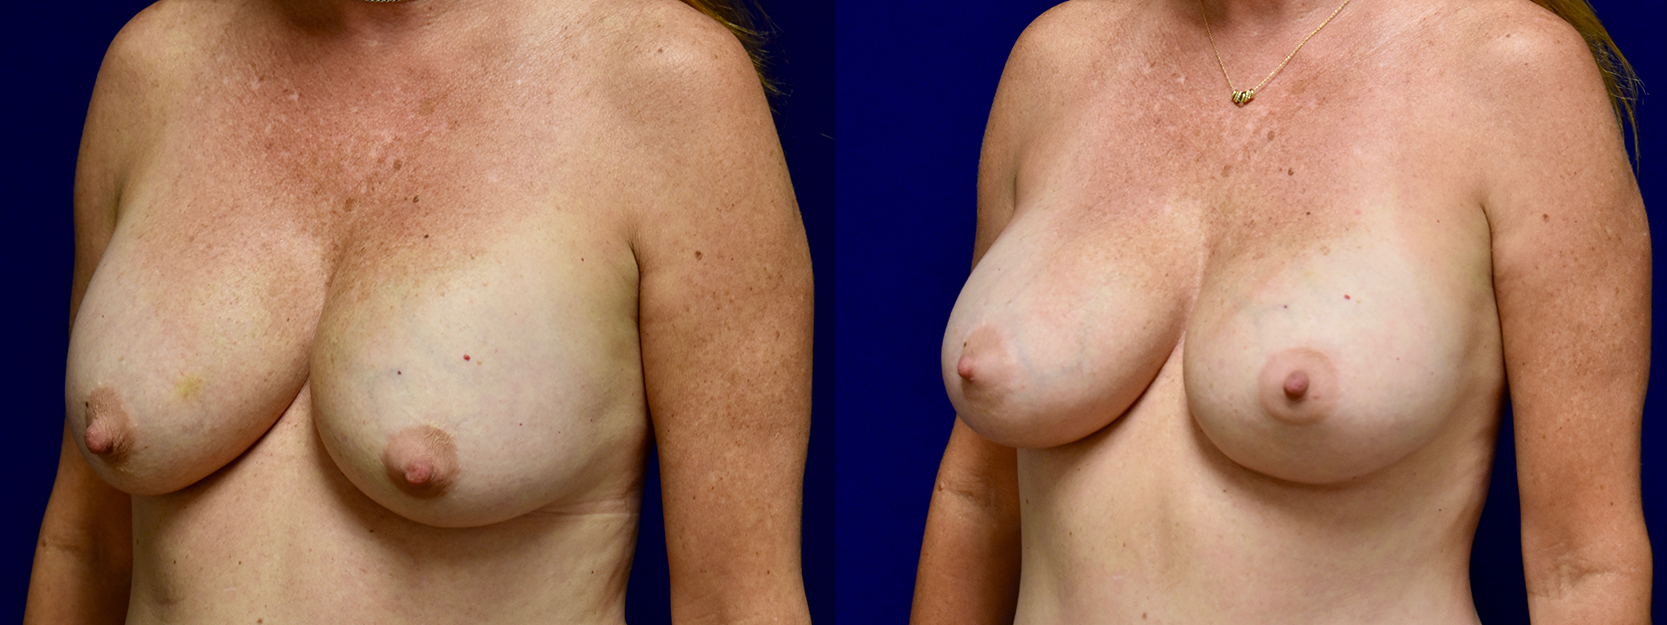 Left 3/4 View - Breast Implant Revision